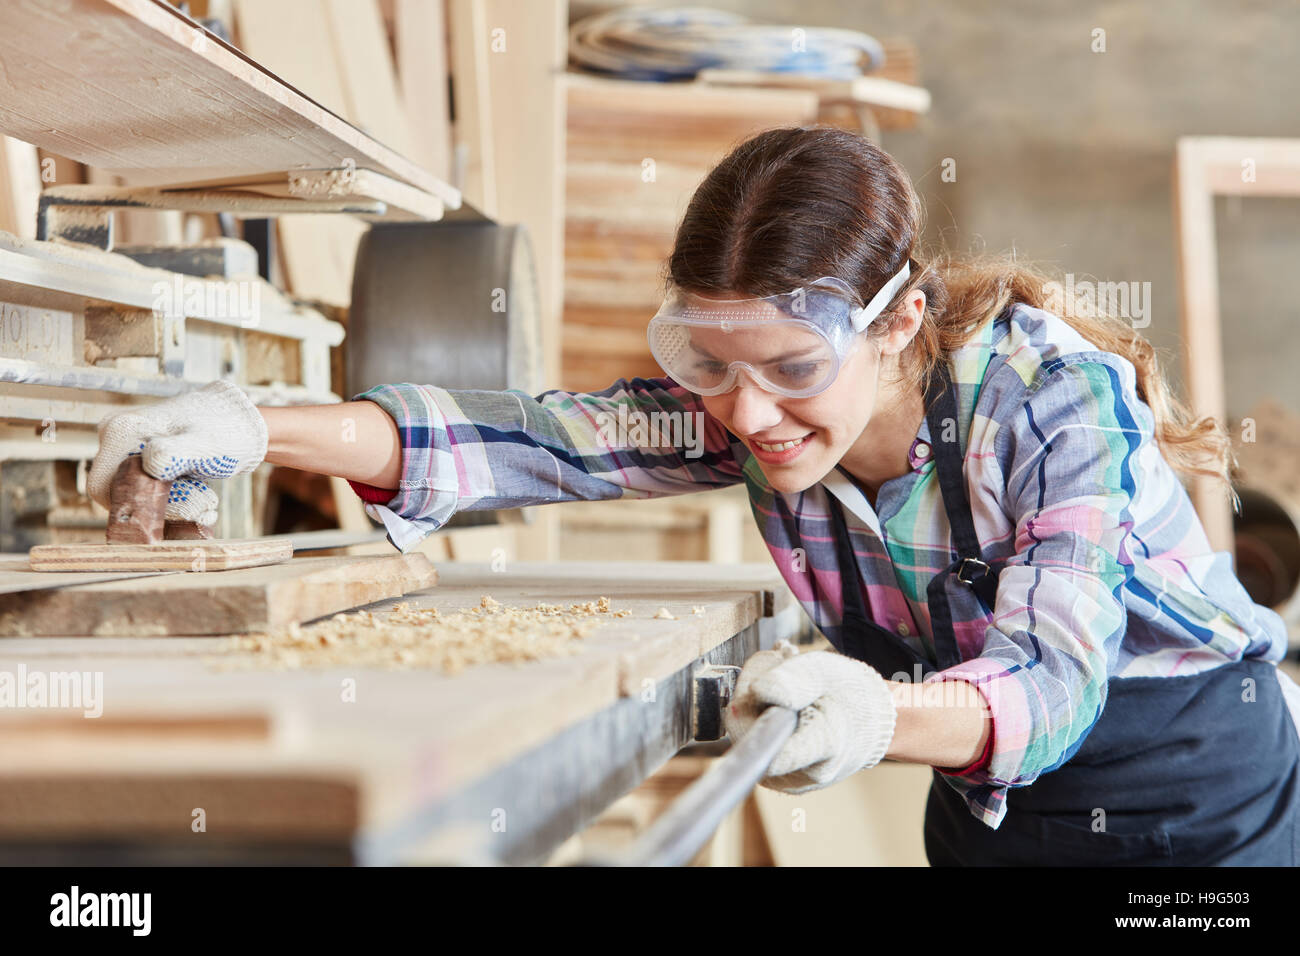 Woman as joiner grinding wood Stock Photo